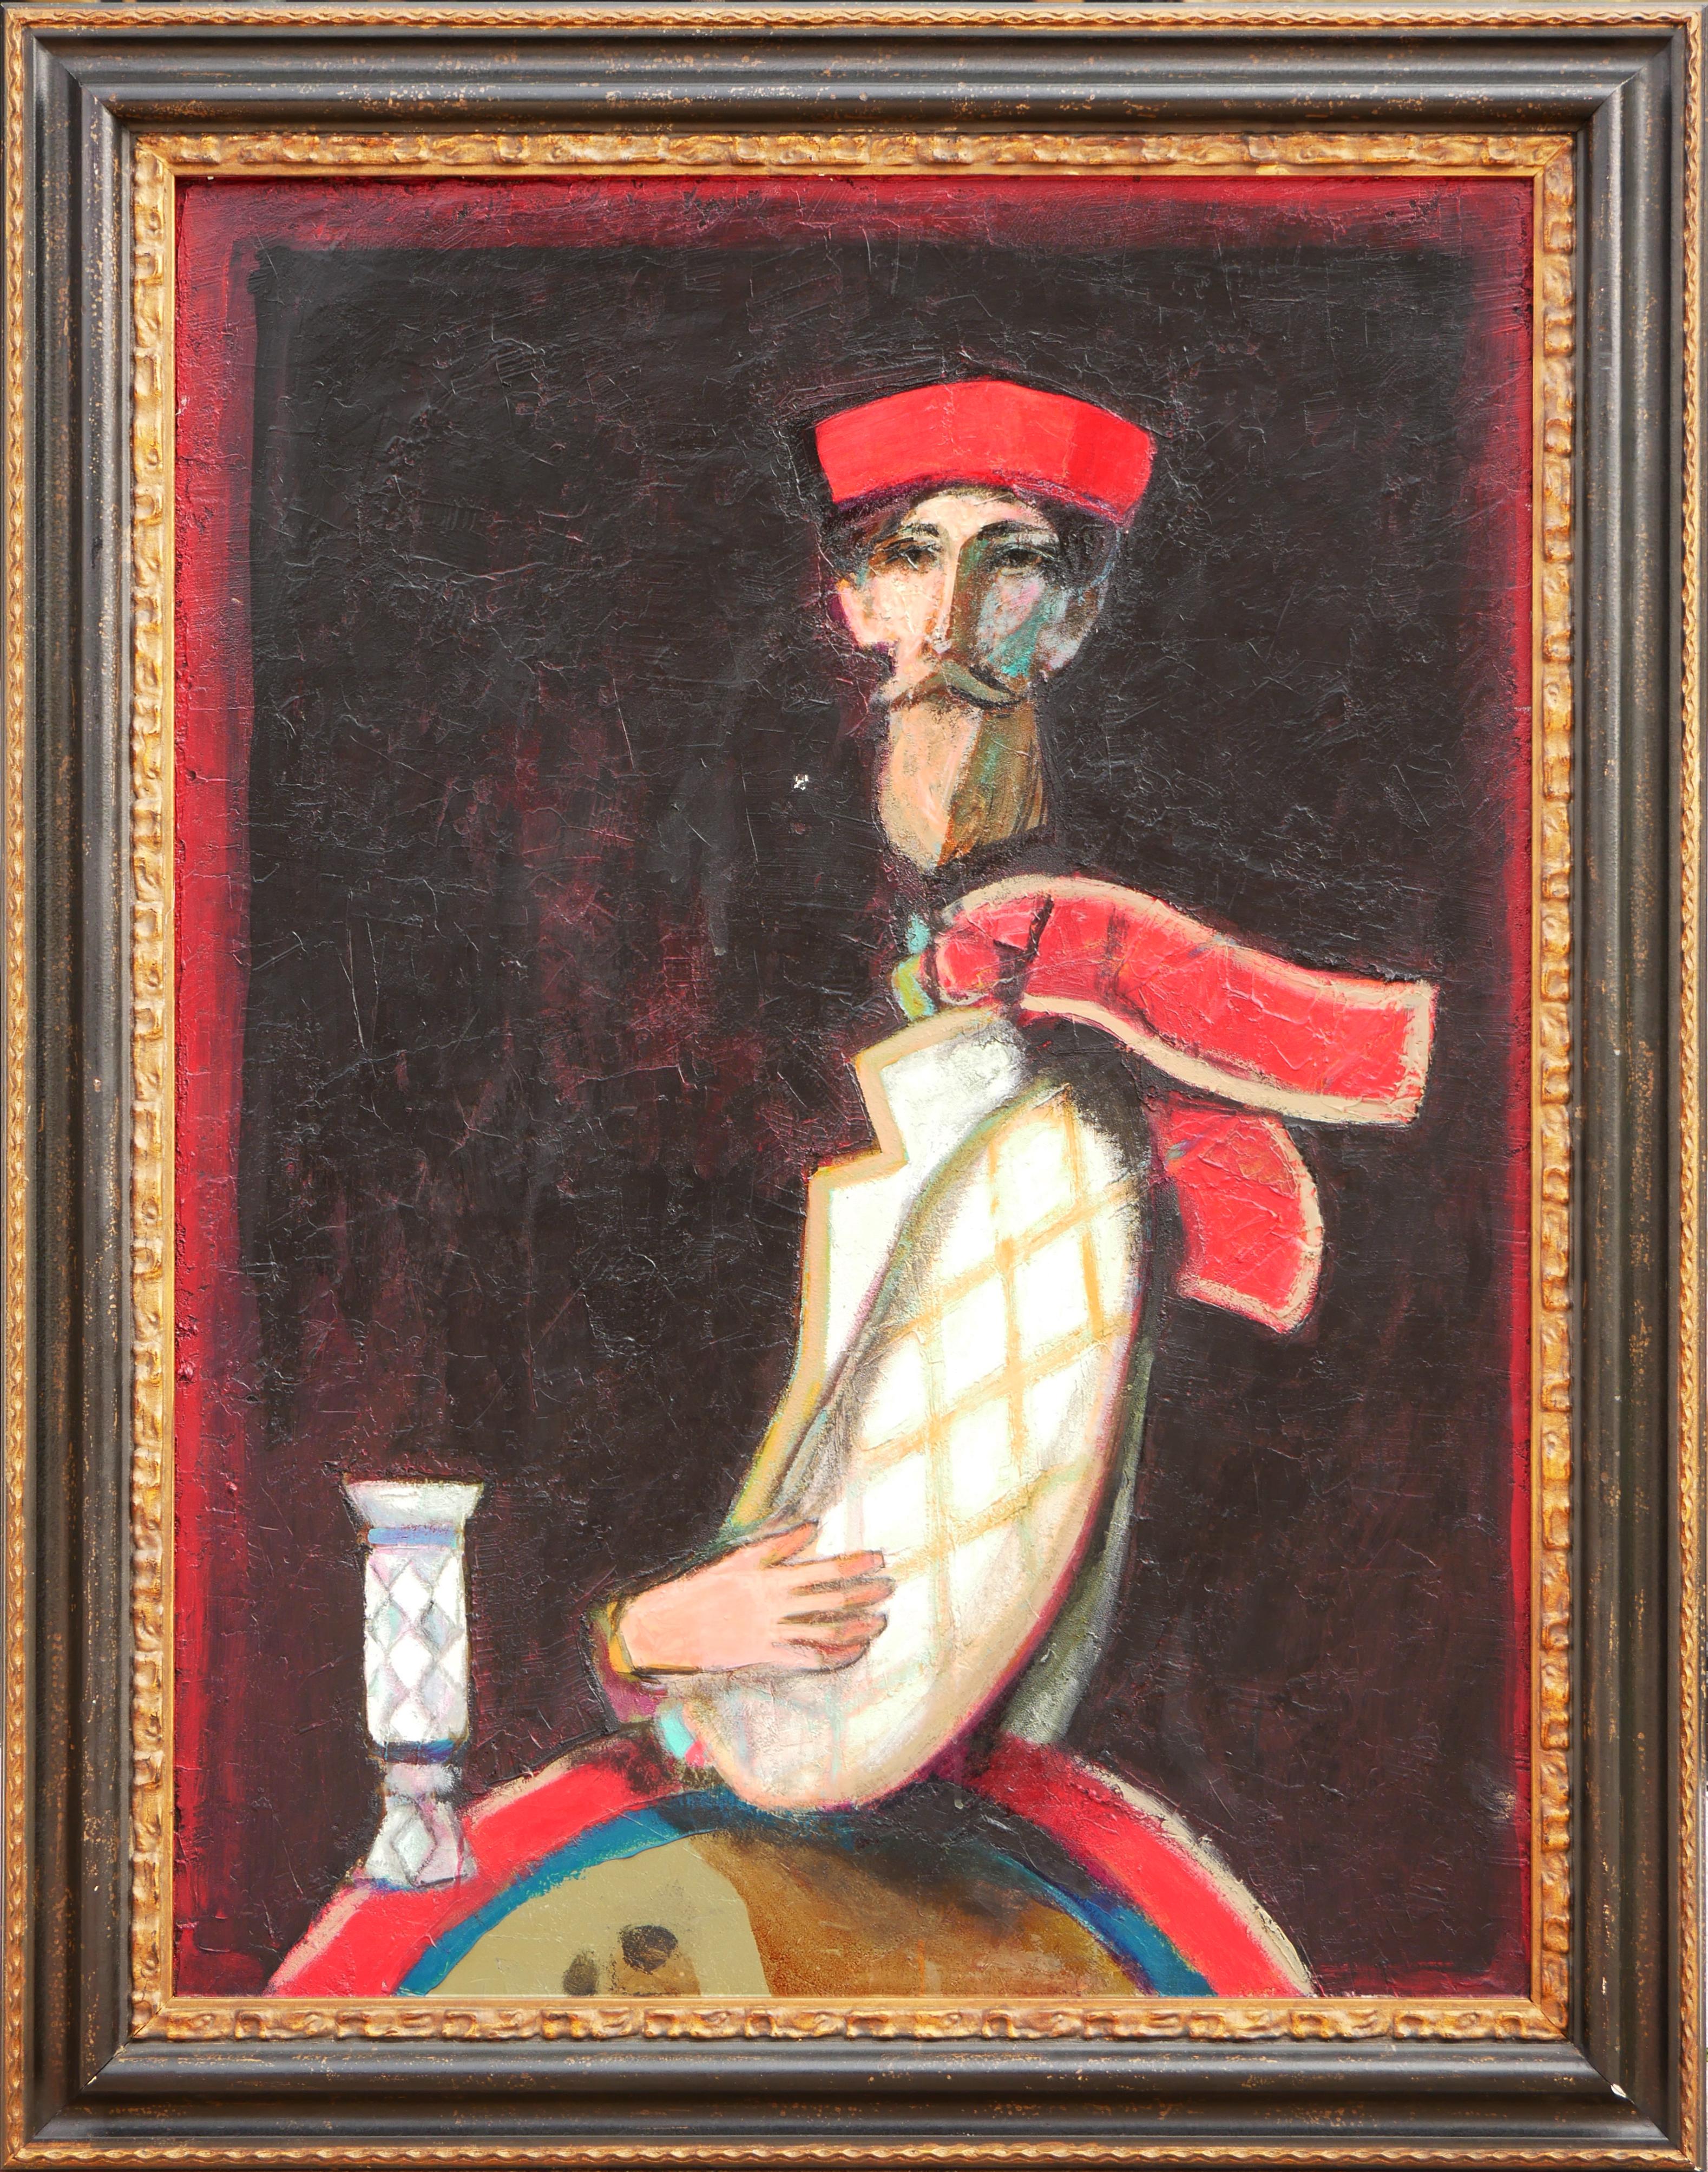 David Adickes Figurative Painting - "Seated Figure with Red Beret" Modern Abstract Figurative Portrait Painting